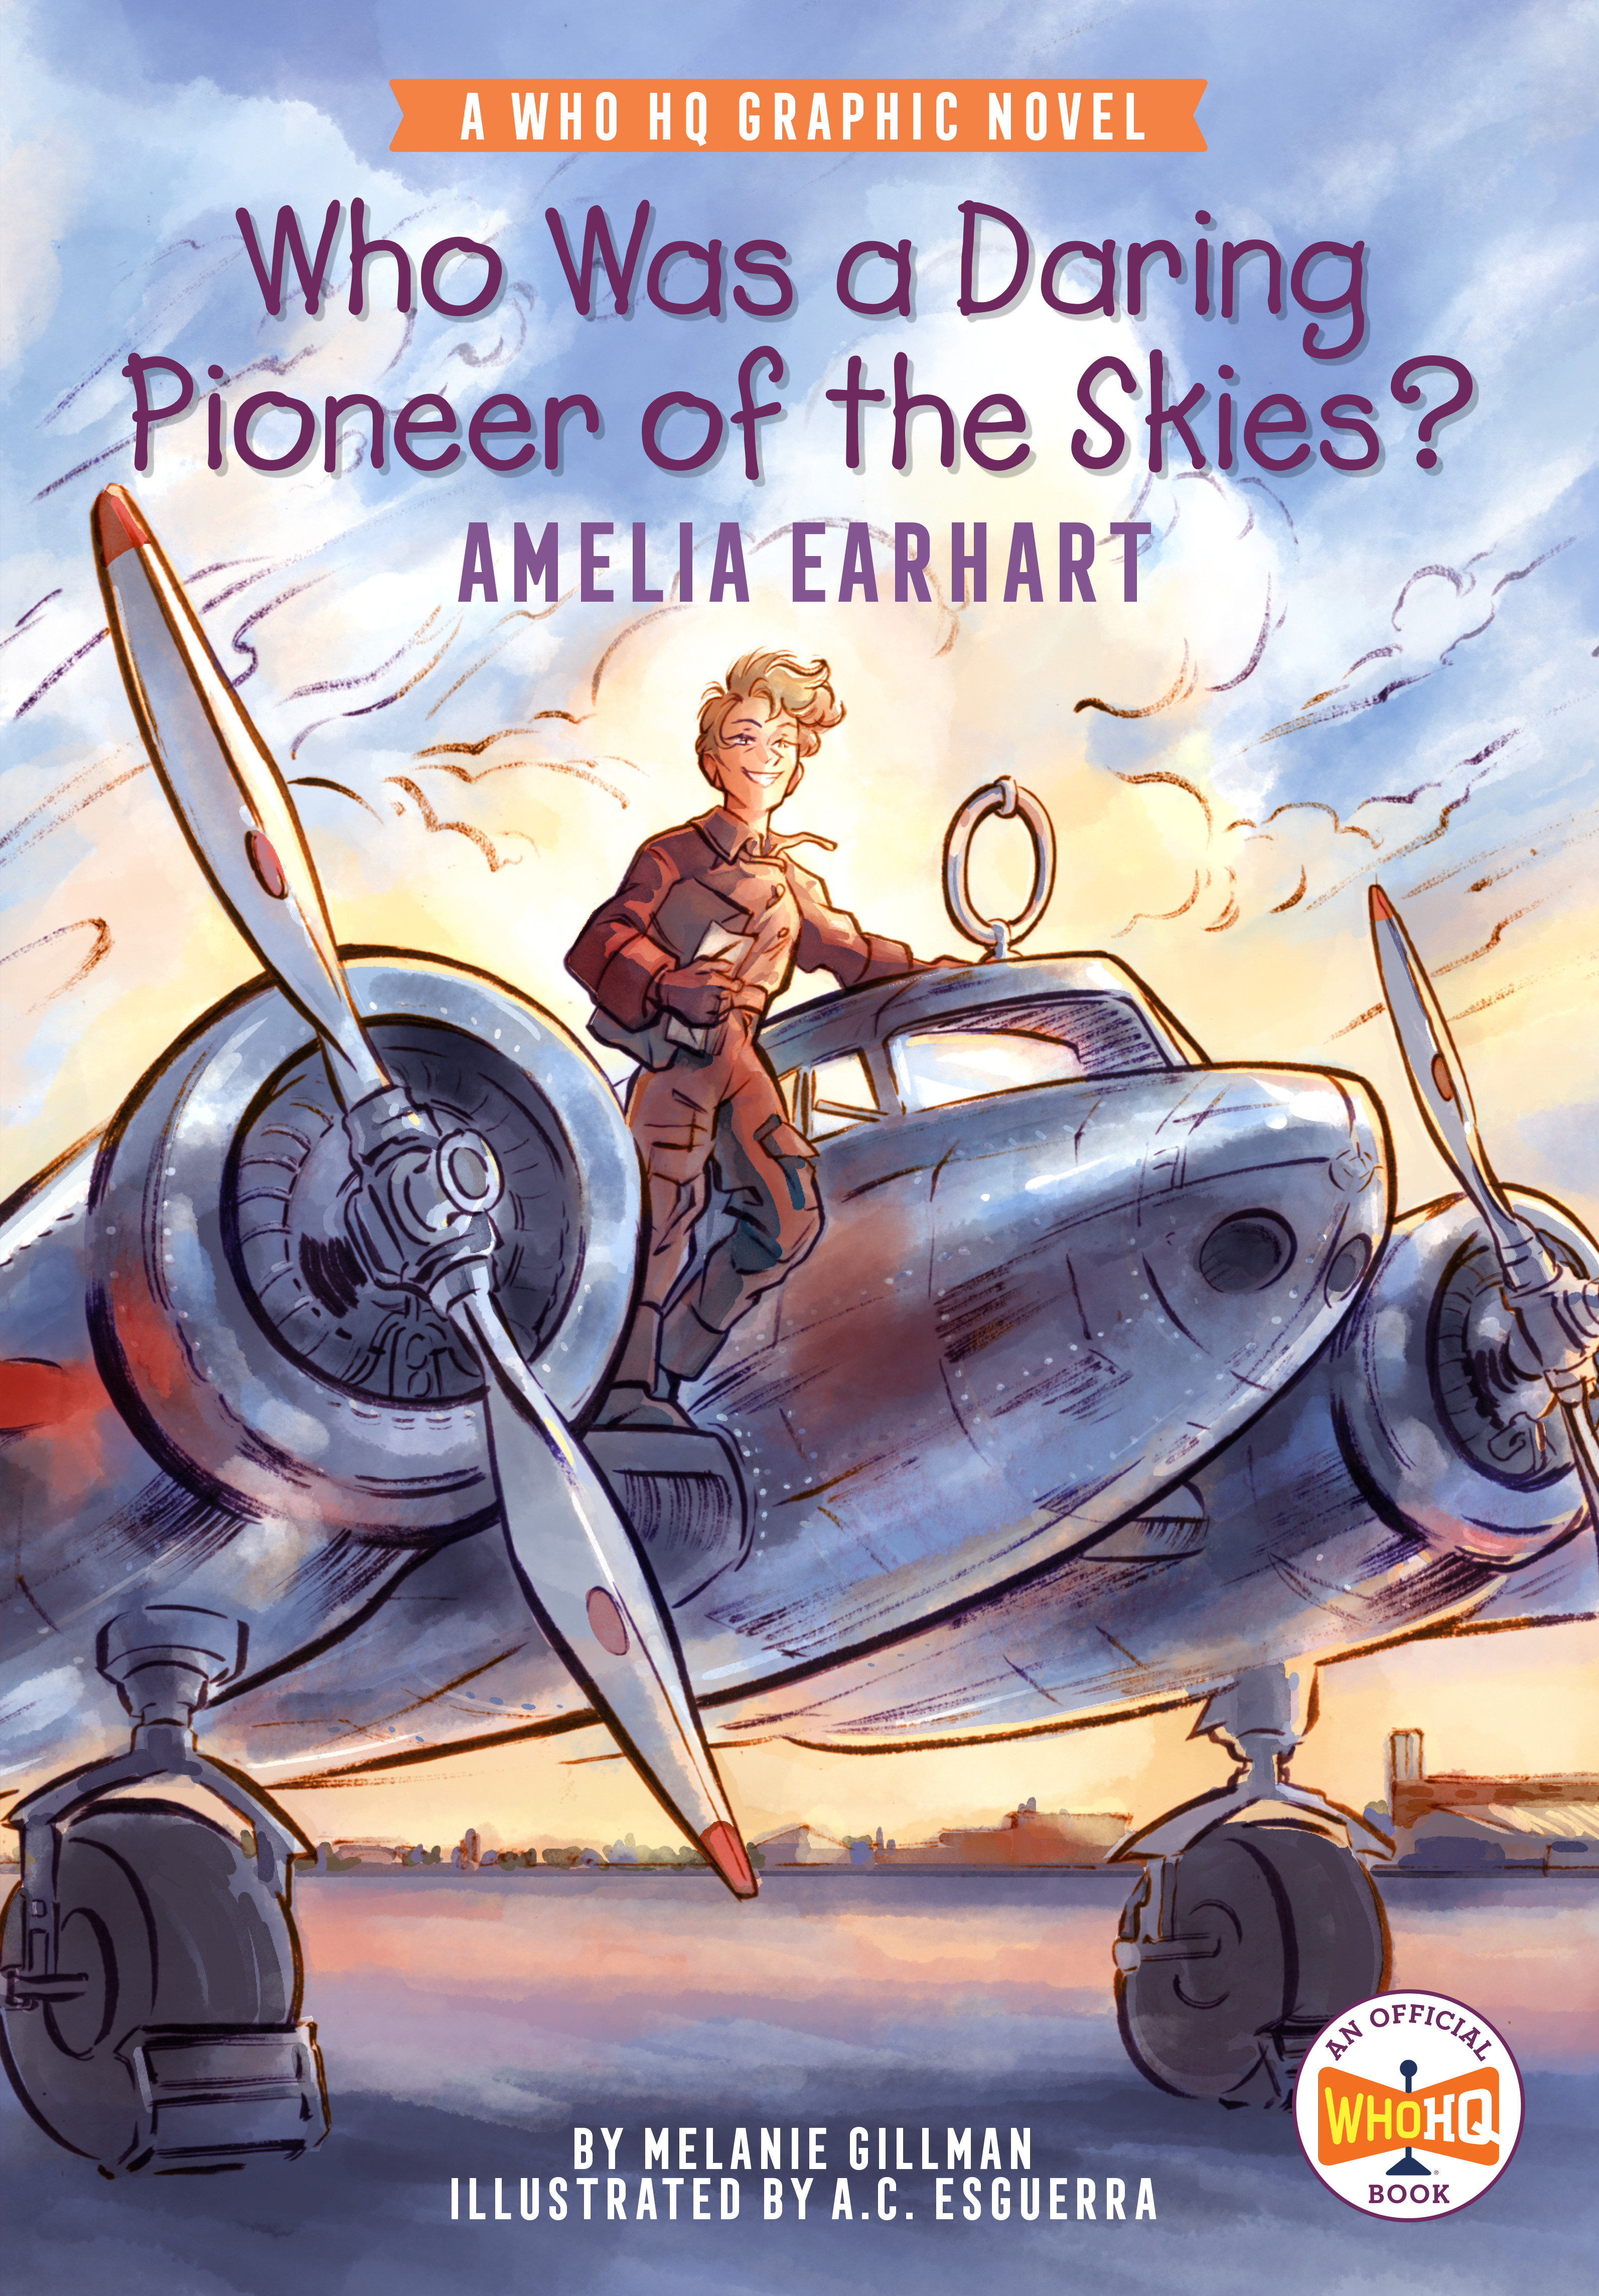 Who Was A Daring Pioneer of the Skies? Amelia Earhart Graphic Novel